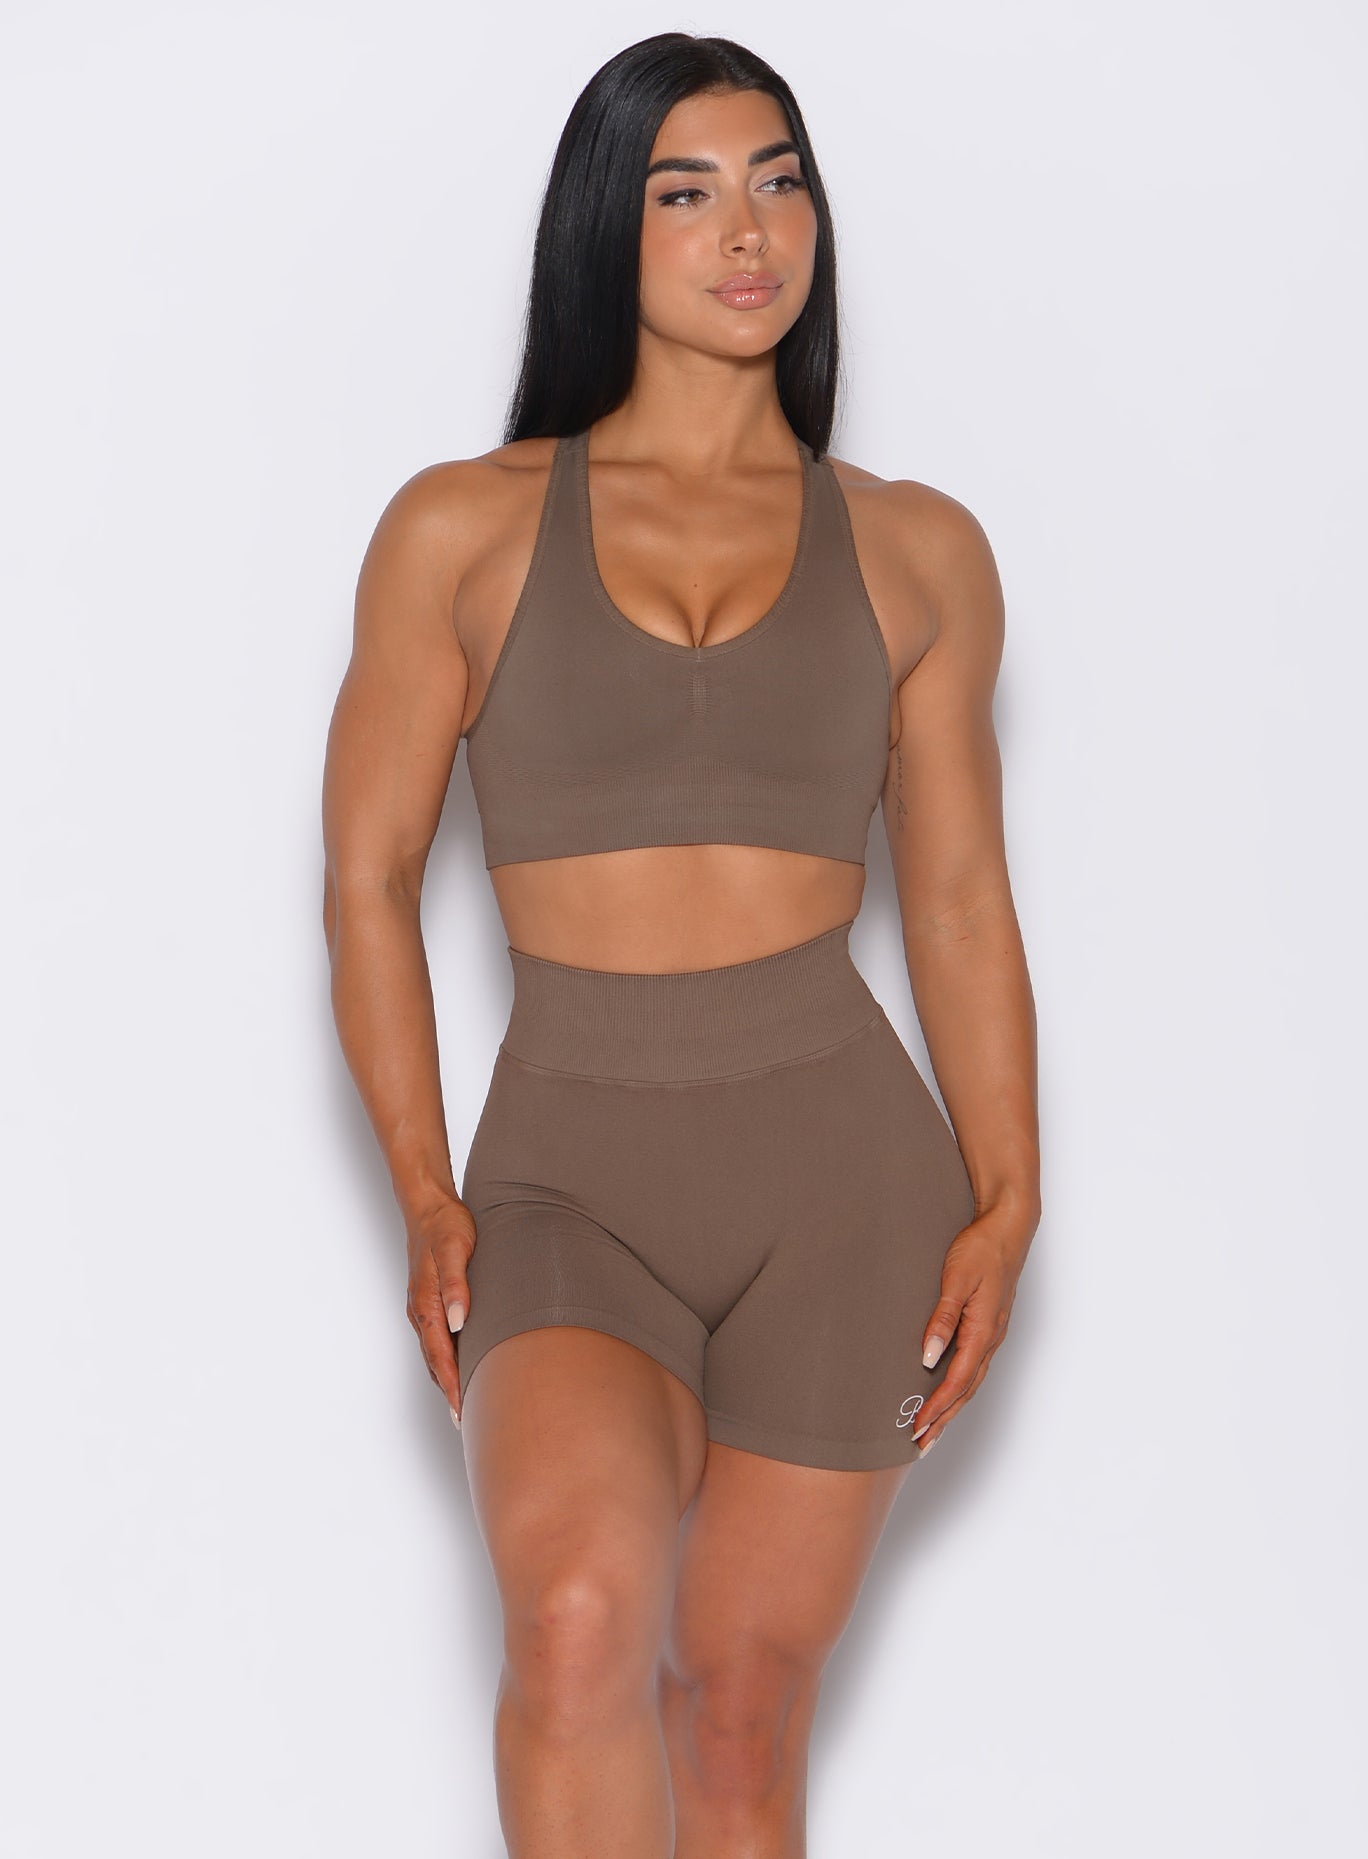 front profile view of a model wearing our smooth seamless bra in beachwood color along with the matching shorts